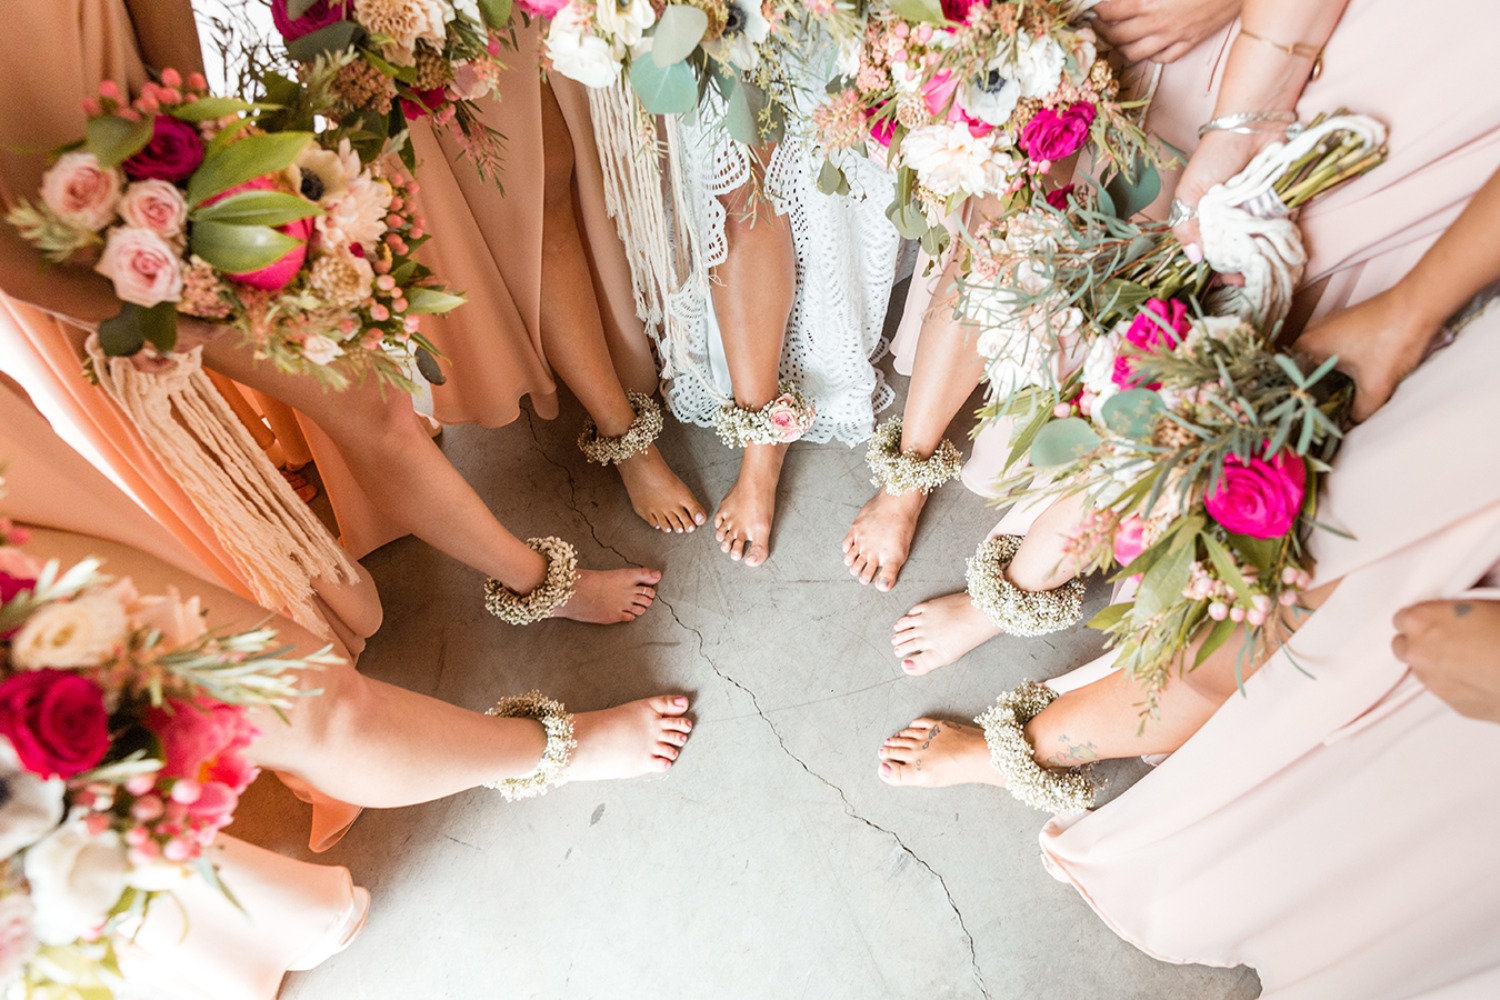 Floral anklets for the bride and bridesmaids